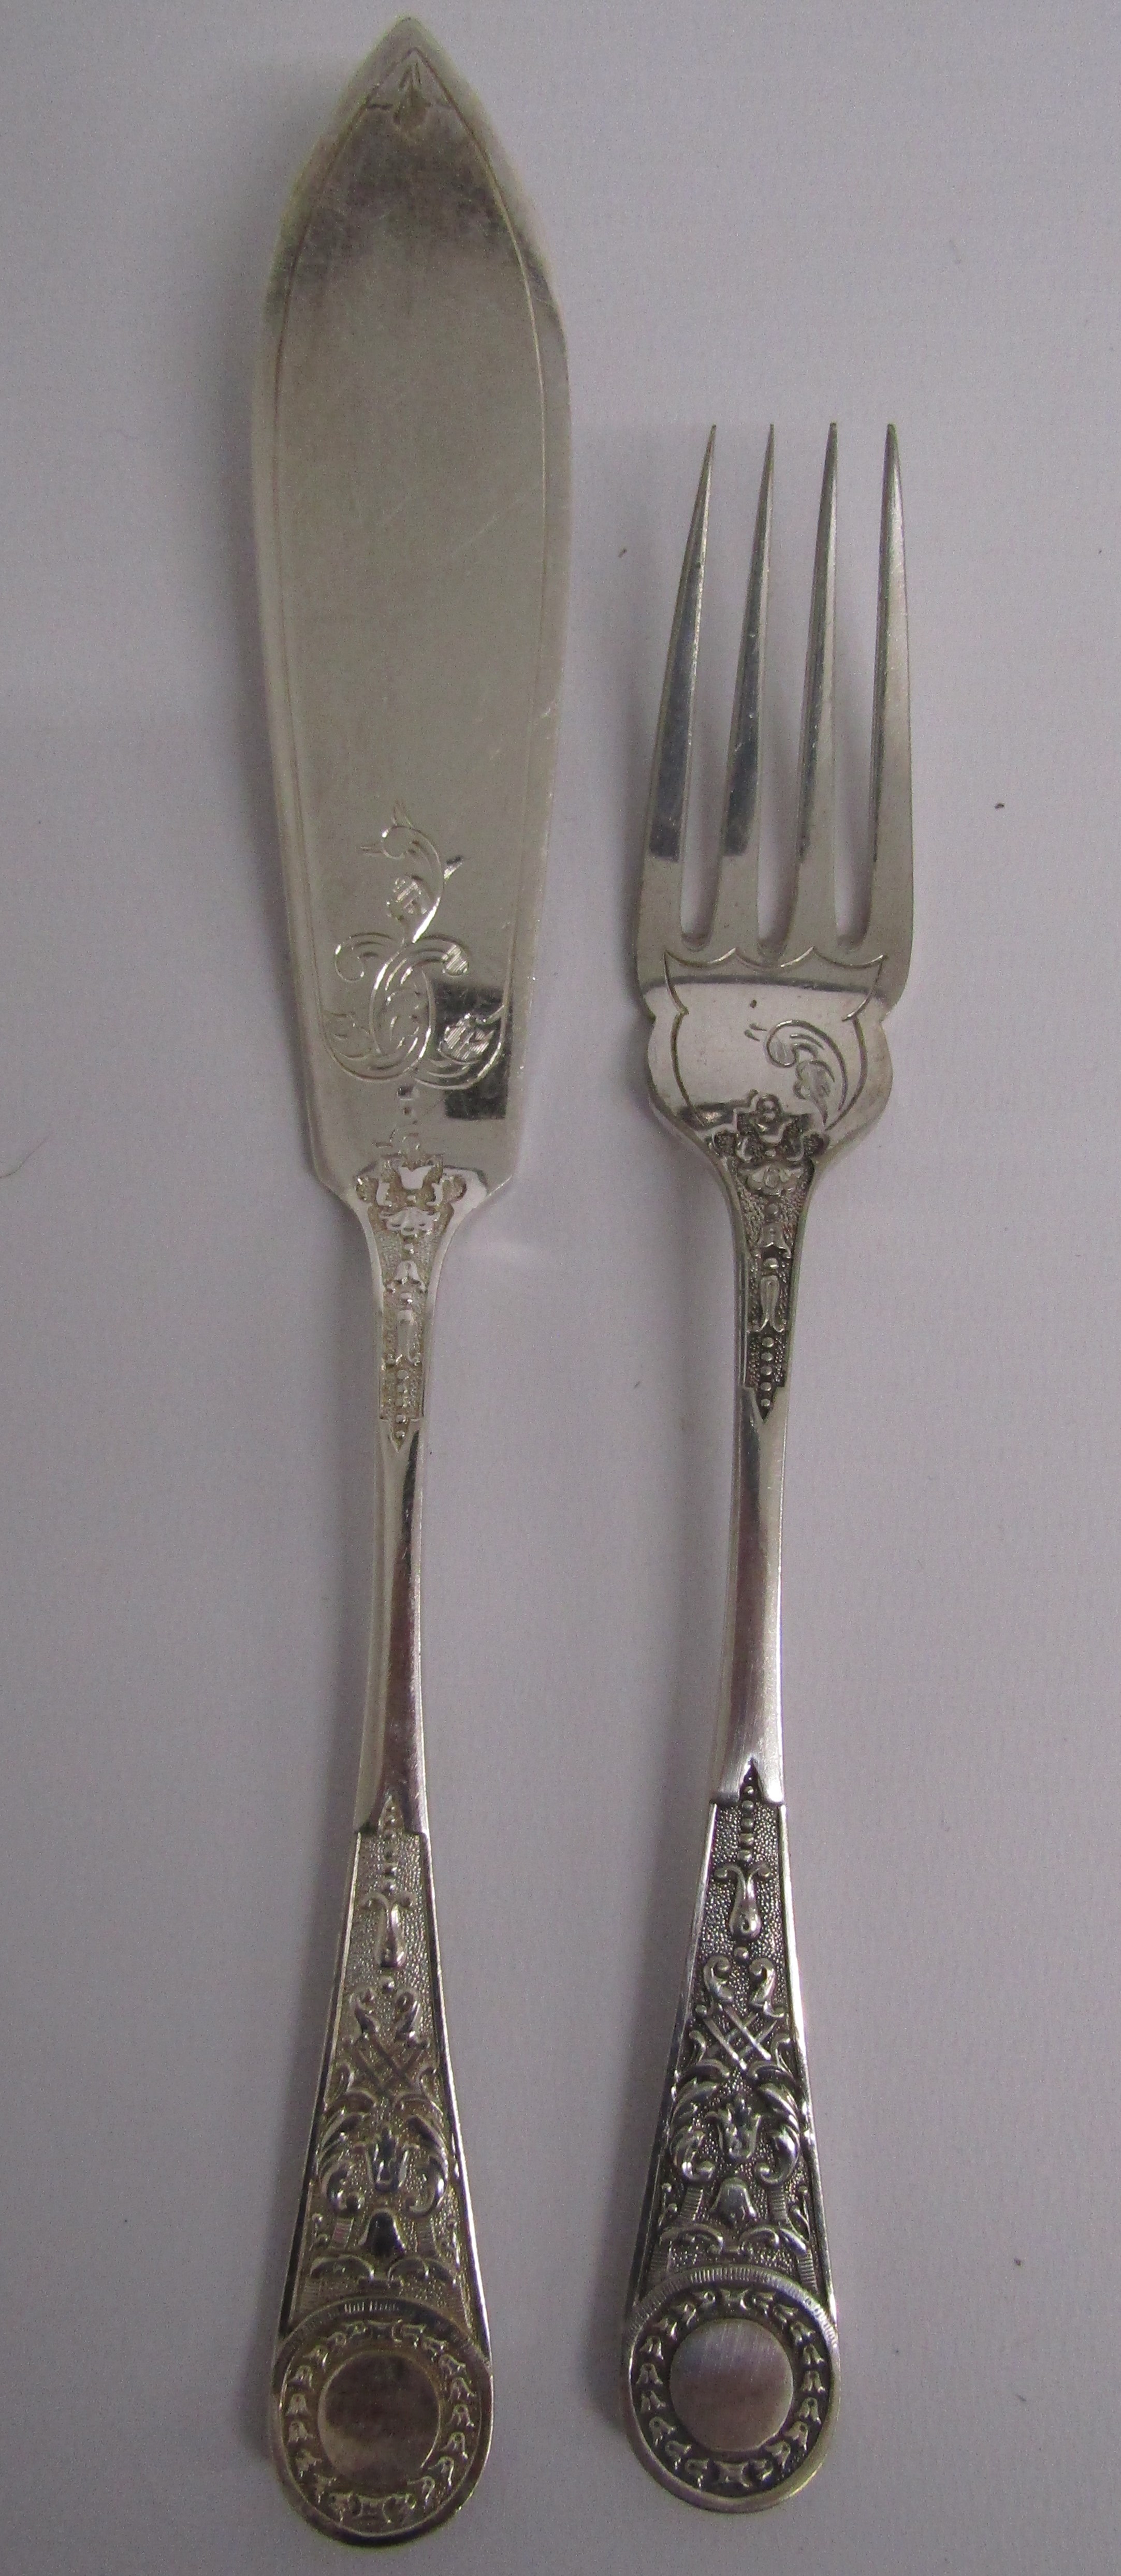 James Dixon & Sons 6 place cutlery set, 12 setting fish cutlery, A Kesteven 12 piece knife and - Image 5 of 9